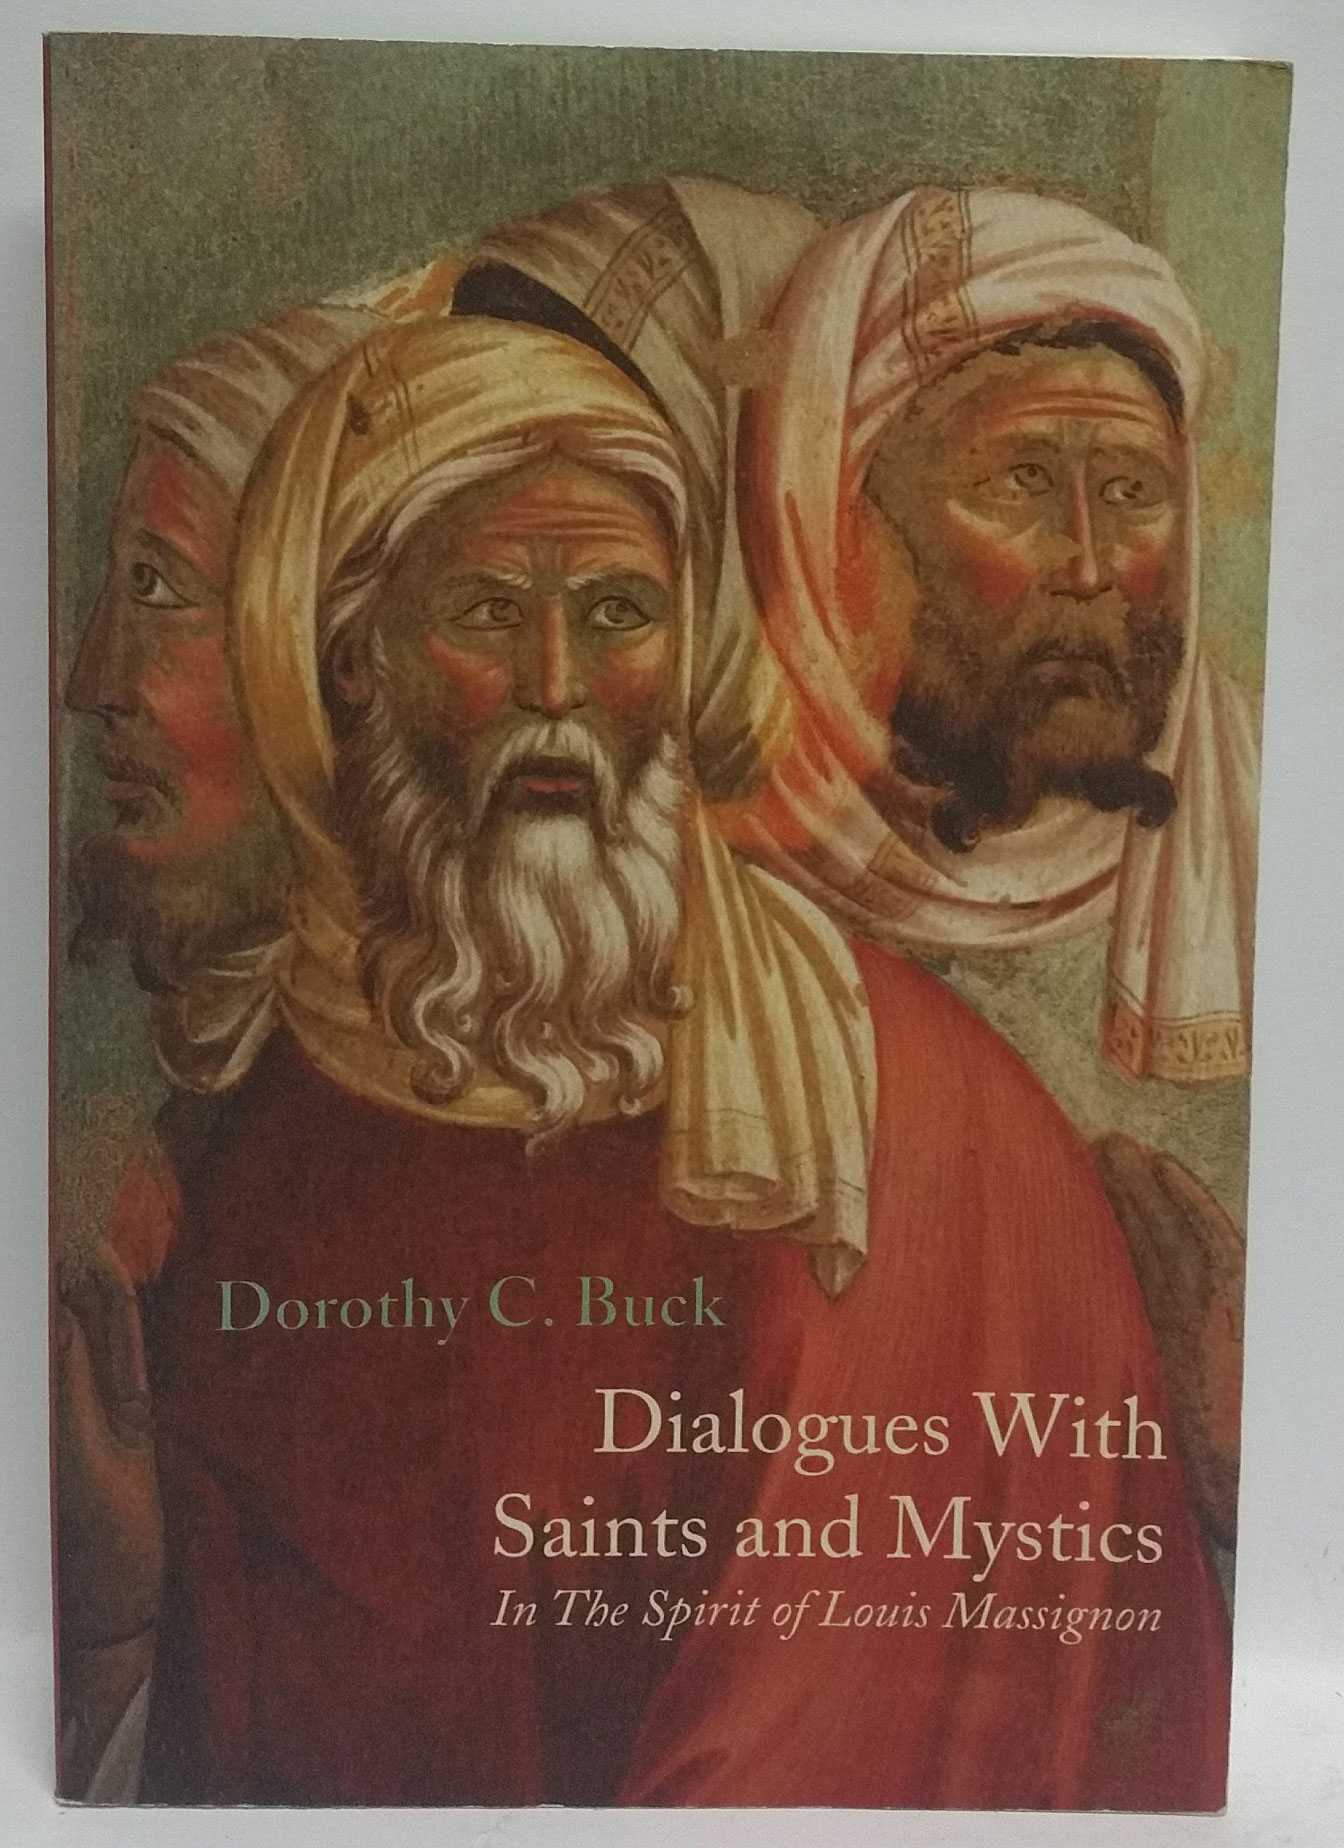 Dorothy C. Buck - Dialogues With Saints and Mystics: In The Spirit of Louis Massignon